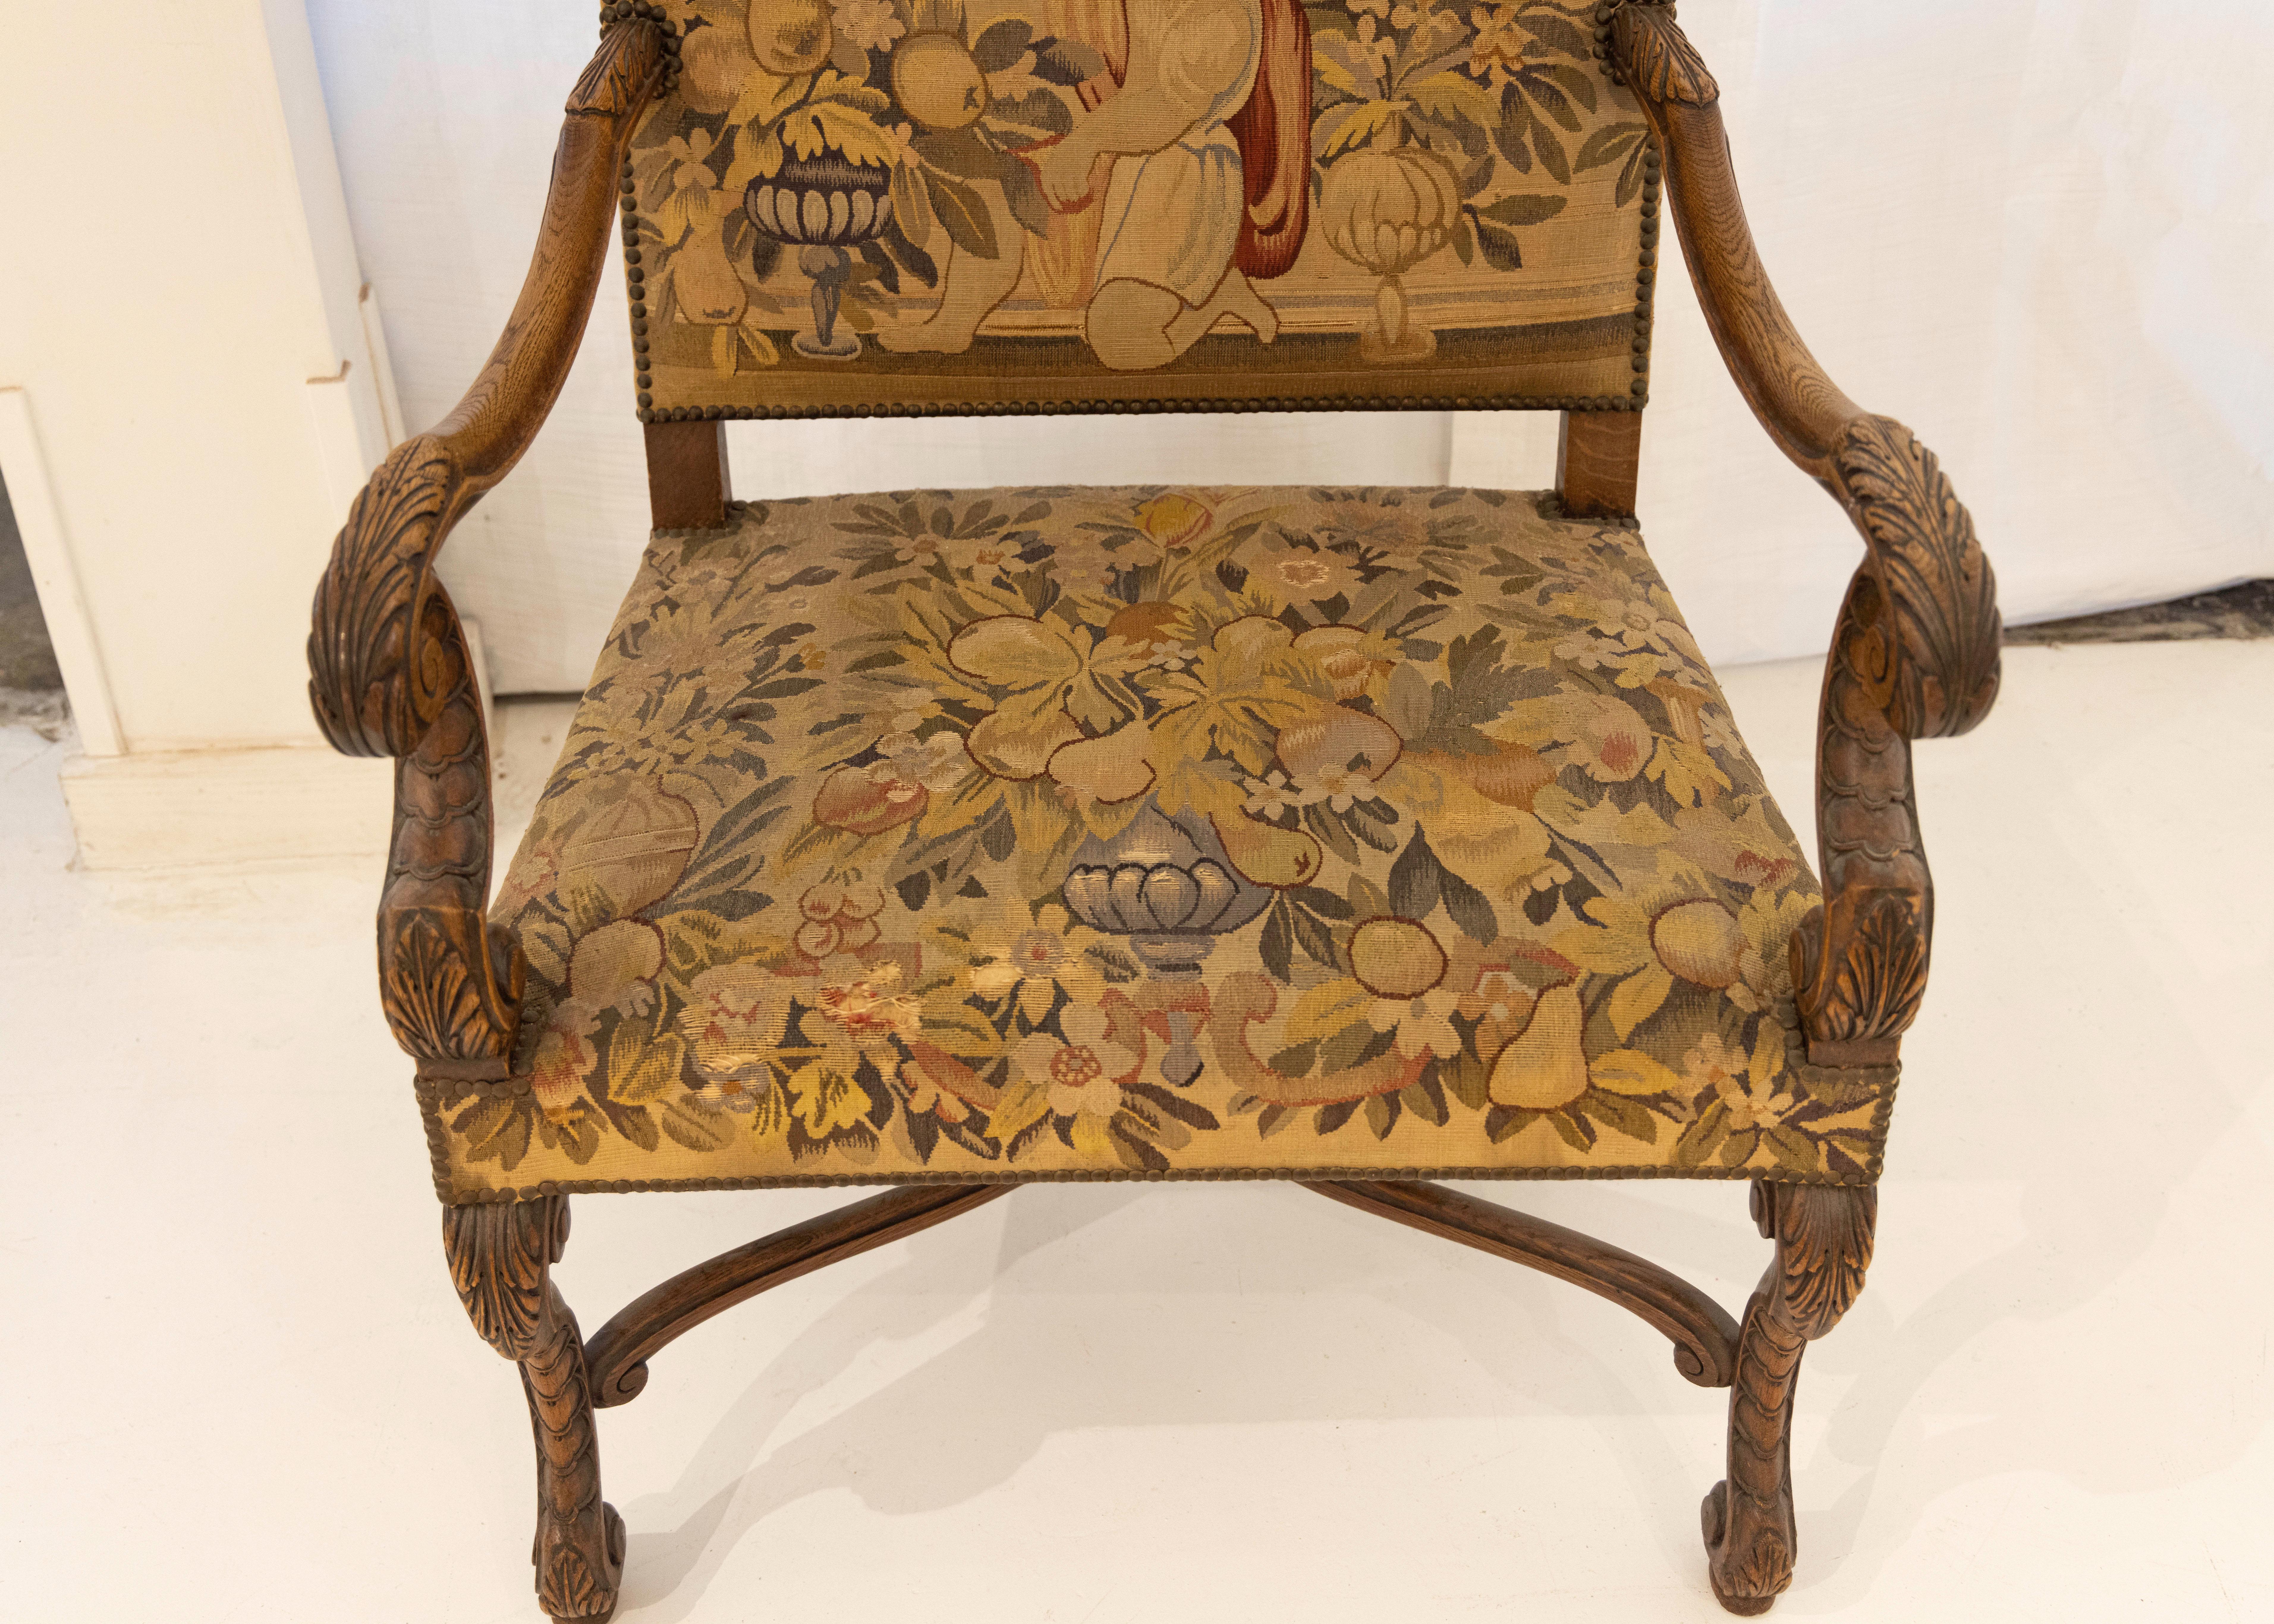 This exquisite French Tapestry chair from the 1700s is a rare gem. It depicts a young boy surrounded by fruit and flowers. The chair has a yellow tint similar to how paintings during this time were painted with yellow ochre undertones. The wood and